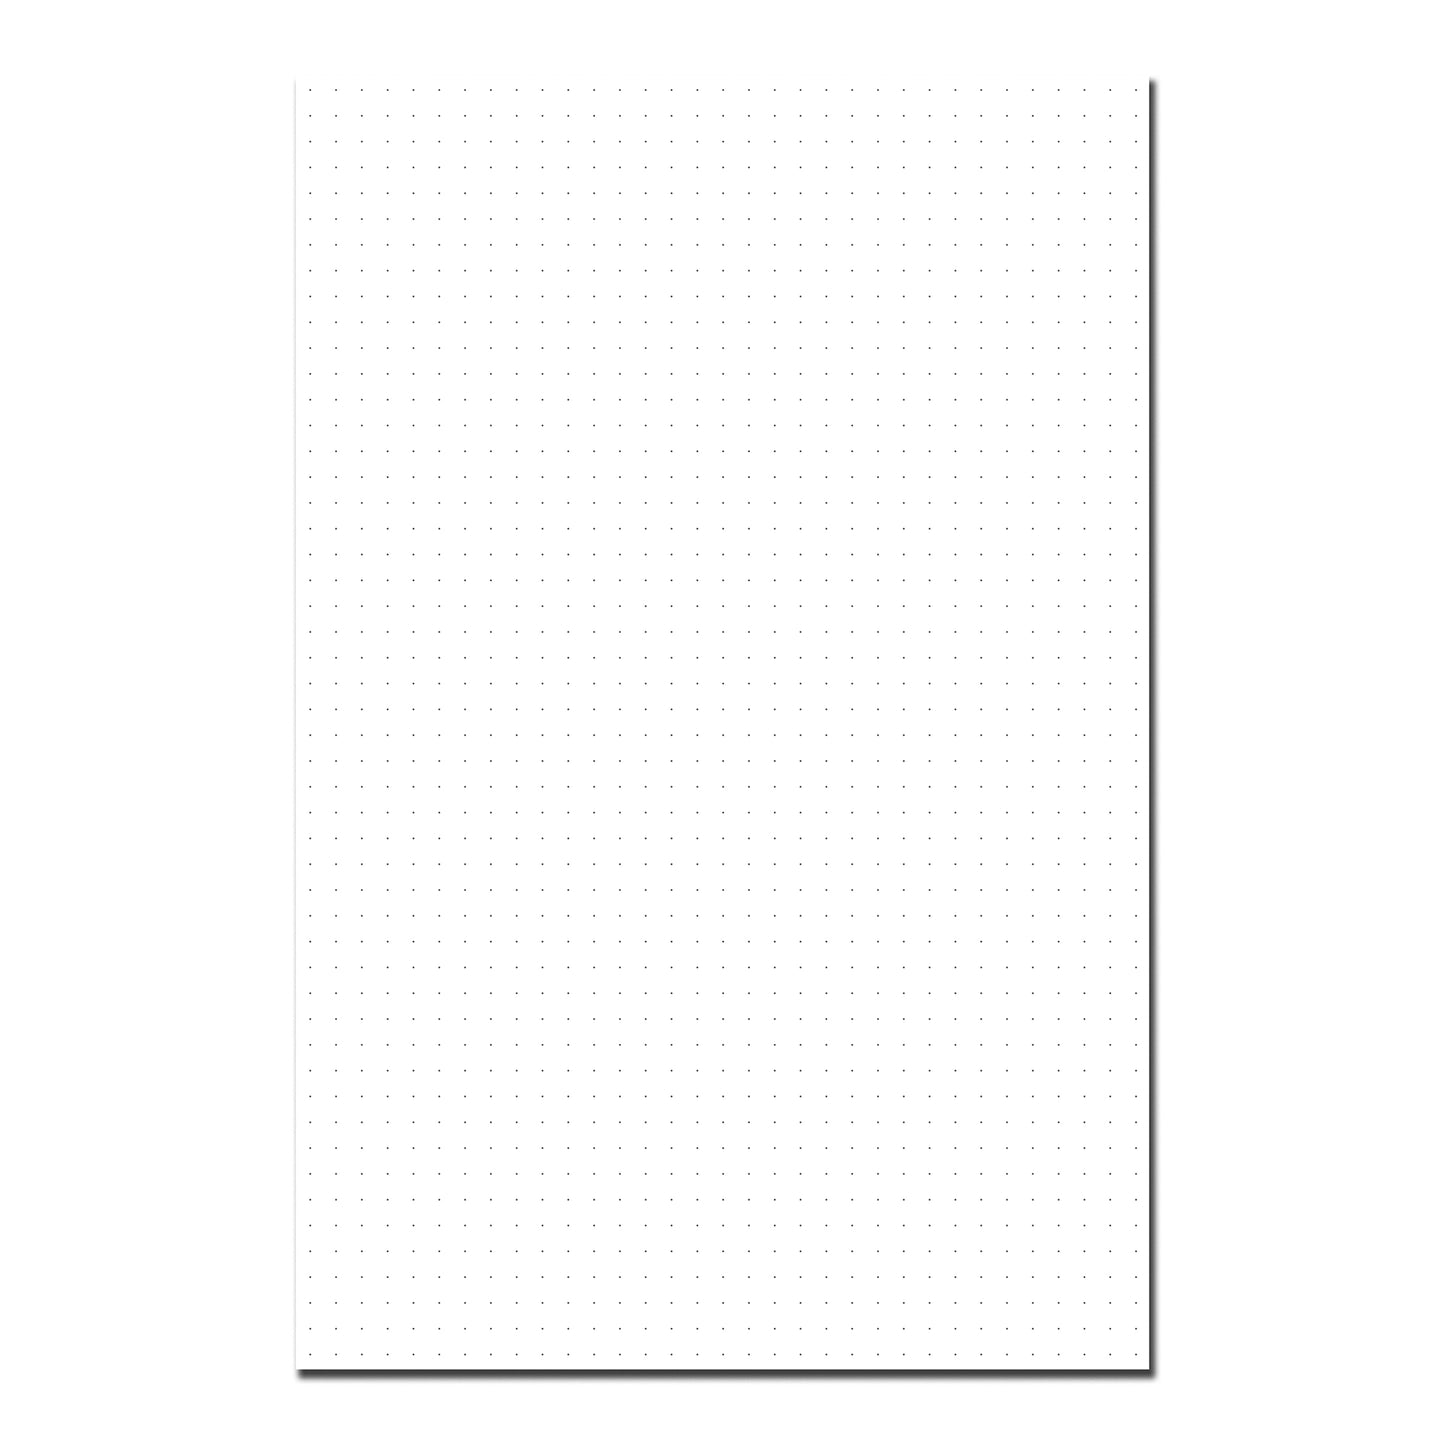 5 Subject Divider Project Book| Assorted Sections or Ruled Only | 100 sheets | B5-176mm x 250mm | Ruled, Graph, Dotted, Plain | 100gsm